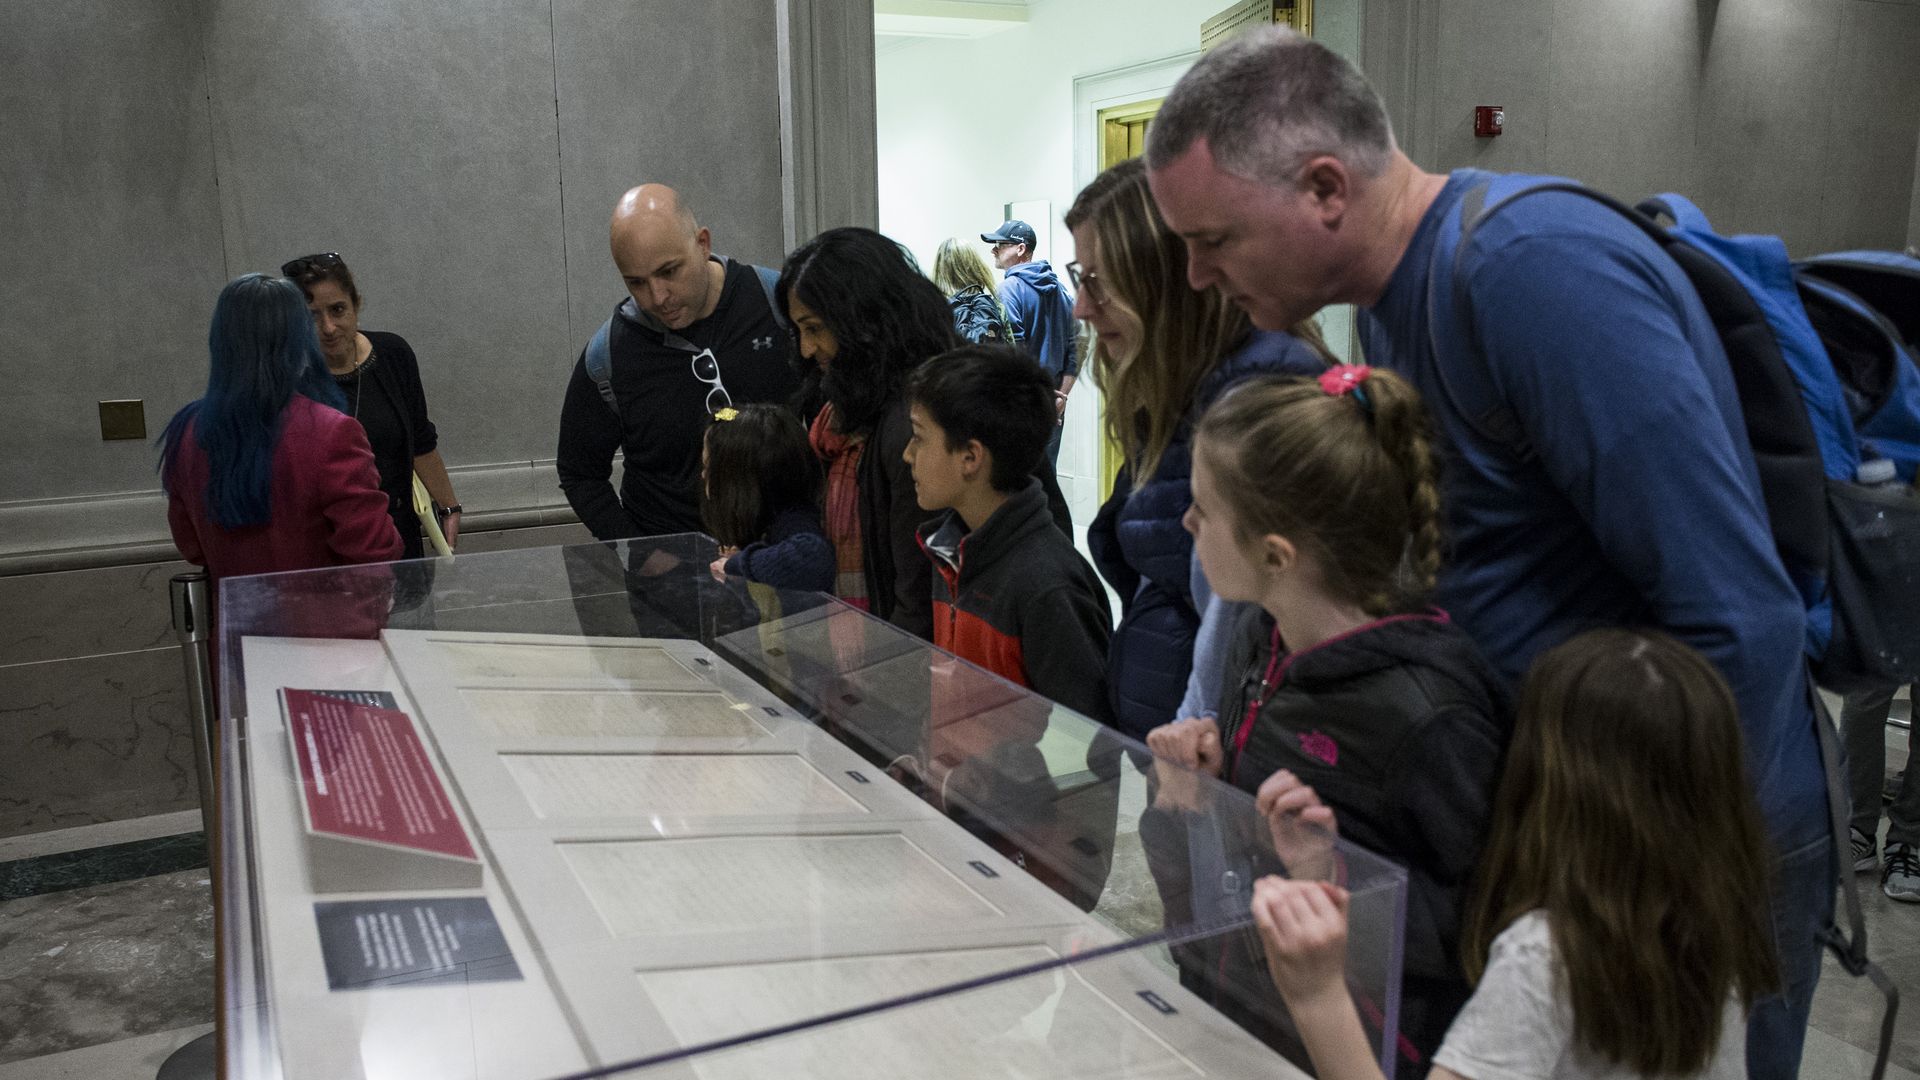 People look at the Emancipation Proclamation at the National Archives 